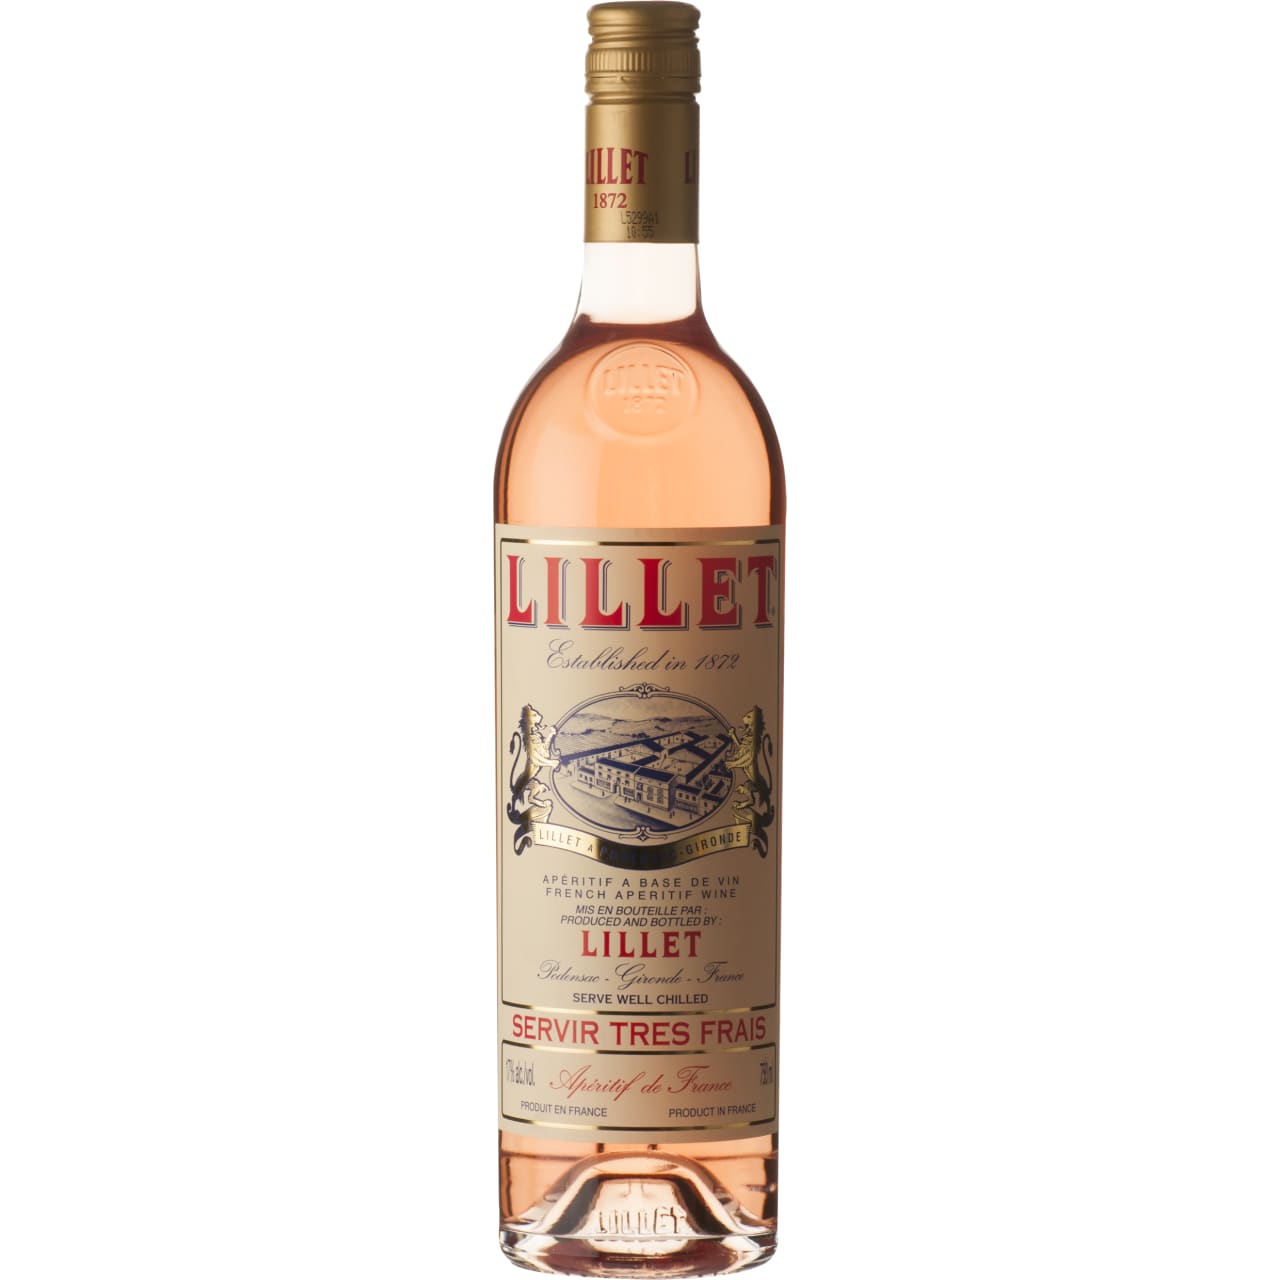 A new product for the 21st century from Lillet, on release its first in more than 50 years. It's a blend of red and white Bordeaux wines mixed with herb and fruit liqueurs before ageing in oak.